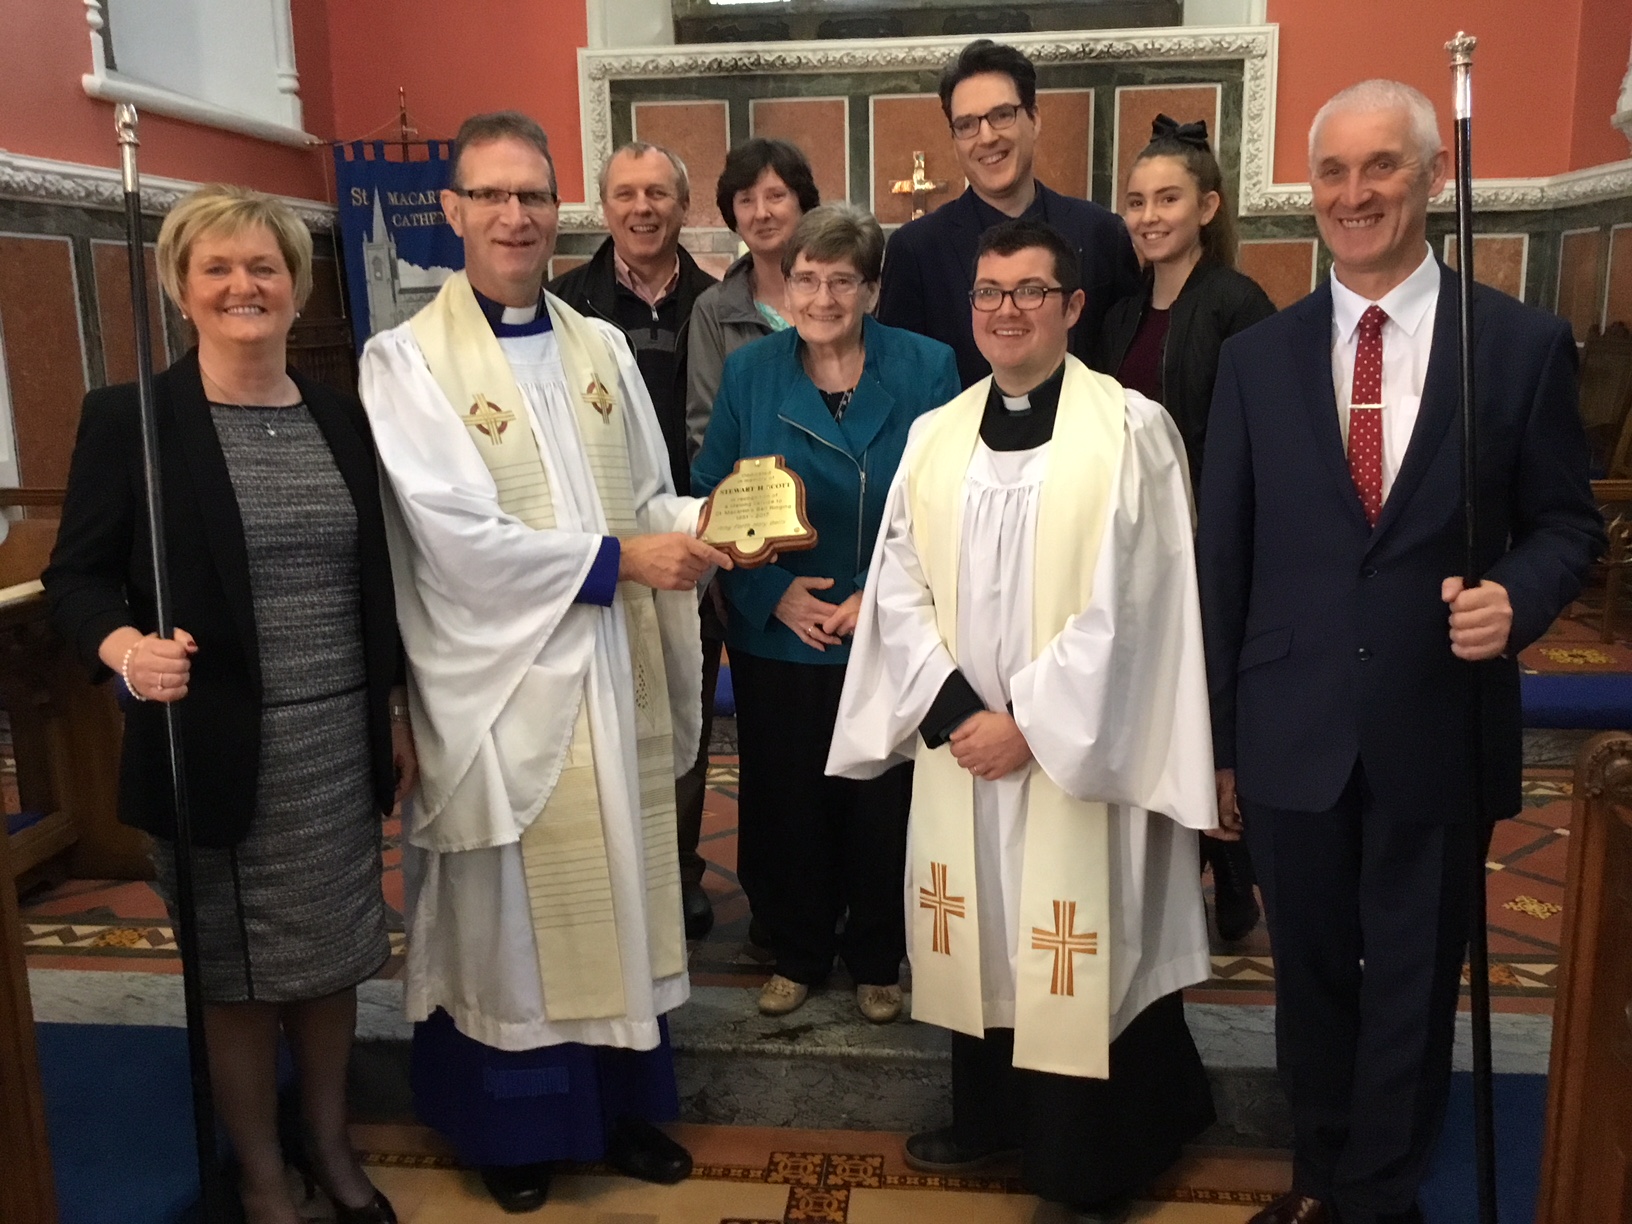 Pictured with the Dean is Stewart's widow Joyce; her daughter Barbara and husband Michael; her son Geoff and his daughter Clara. Also included are the curate, the Revd Chris MacBruithin, and Churchwardens, Sandra Richmond and Richard Cochrane.